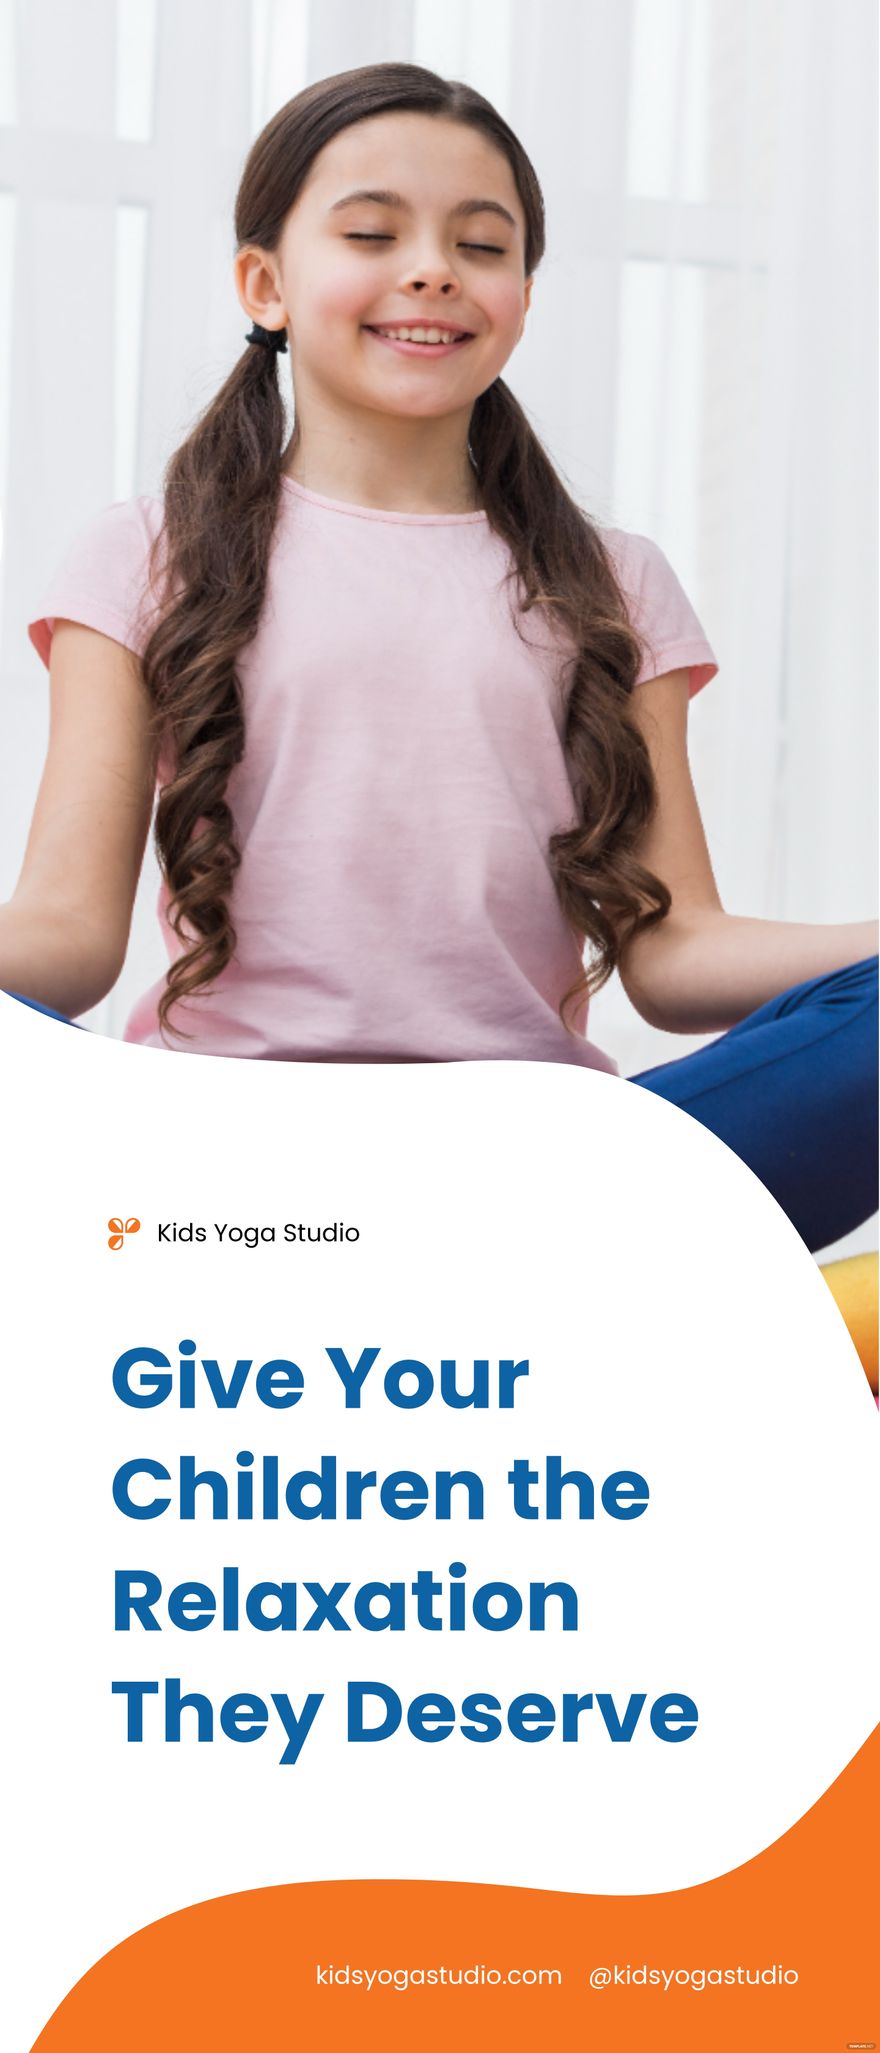 Kids Yoga Roll Up Banner Template in Word, Illustrator, PSD